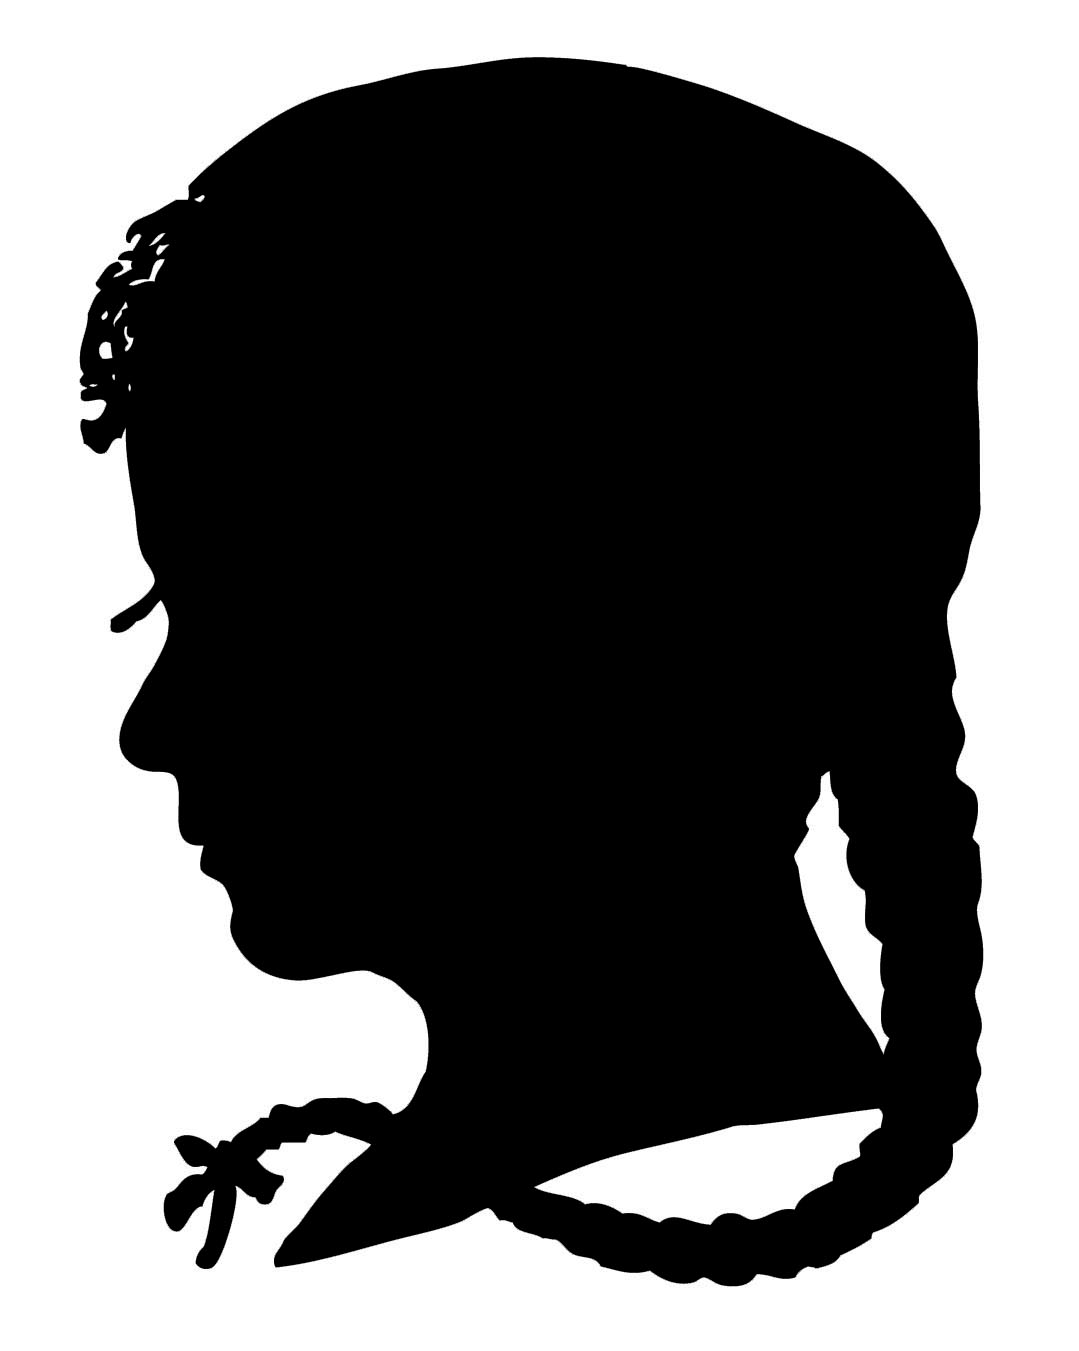 Little Boy Silhouette Kid Image Png Clipart